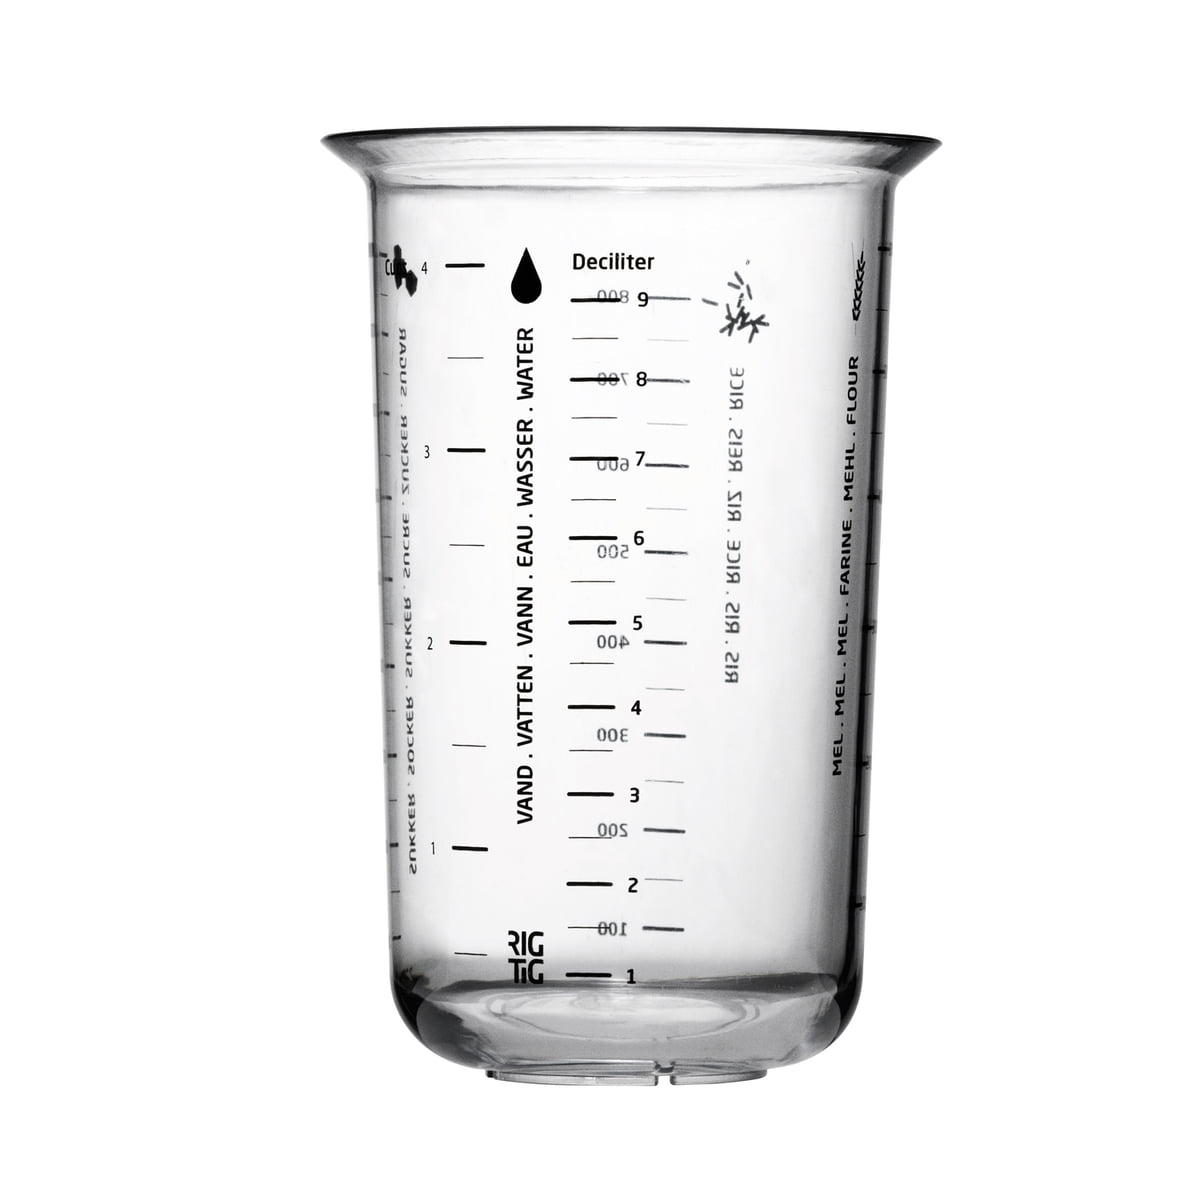 Winco 8 cup Measuring Cup - The Peppermill